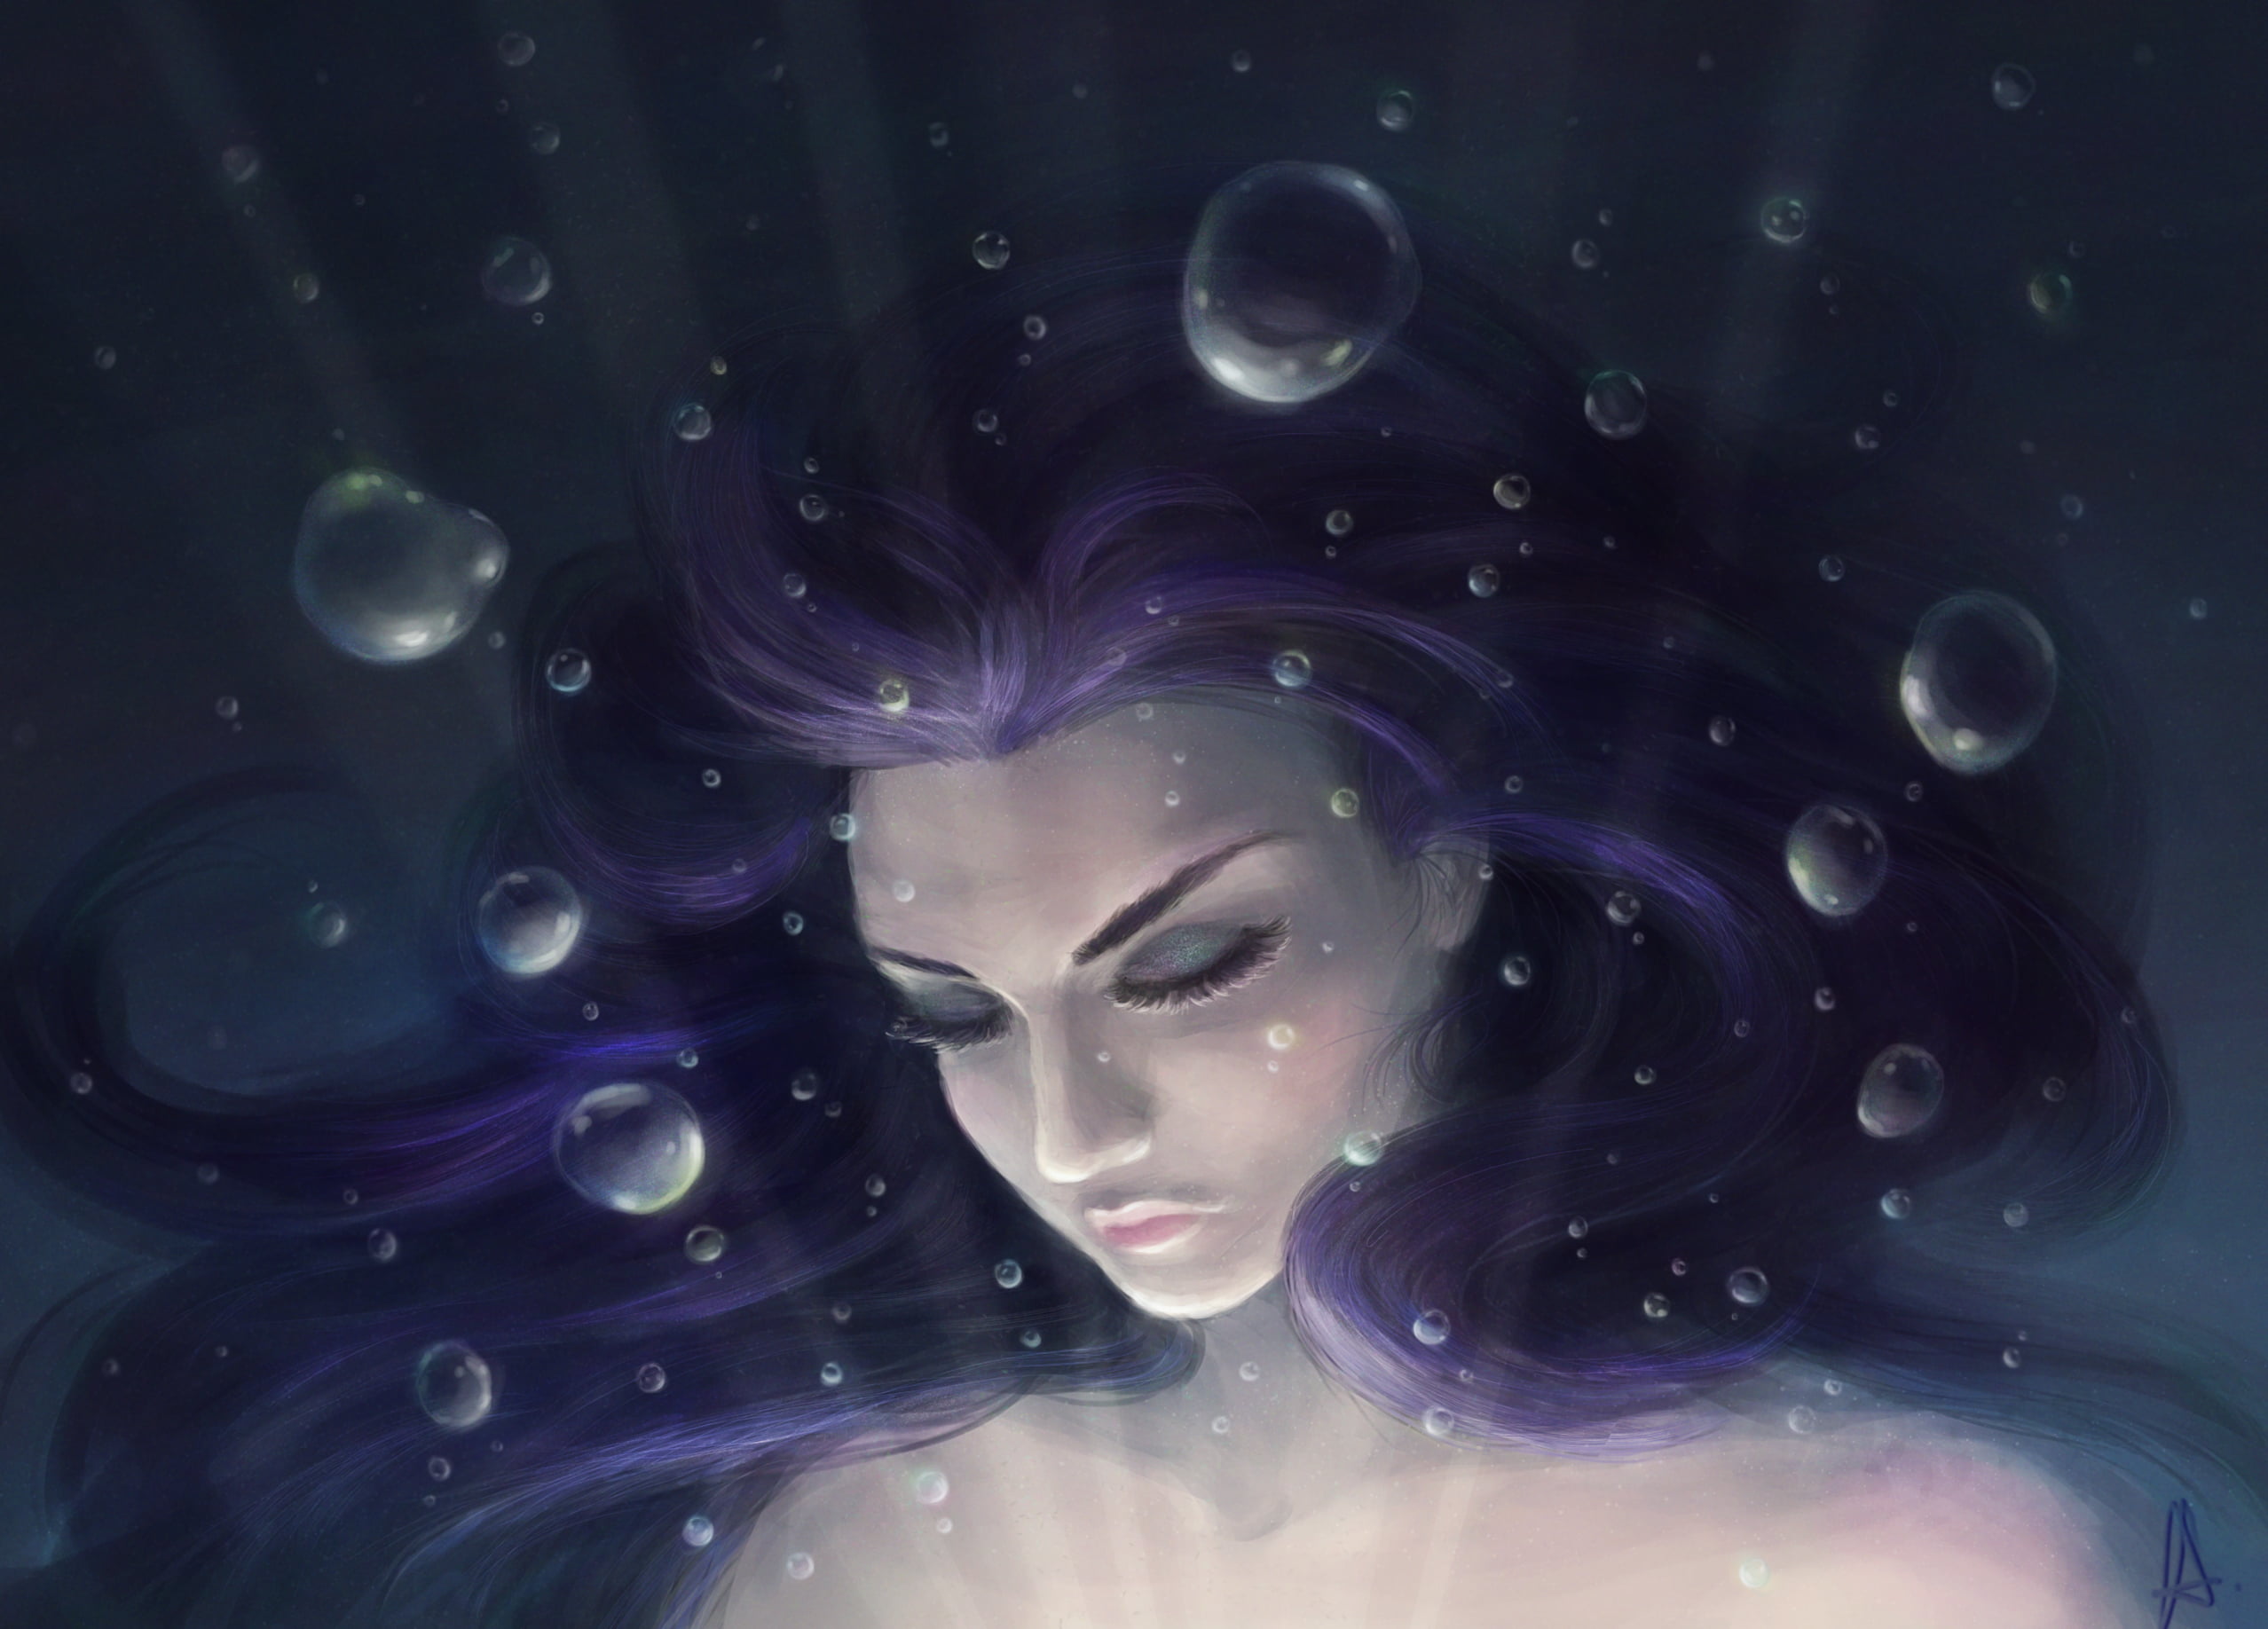 purple haired woman painting, girl, art, face, underwater, bubbles